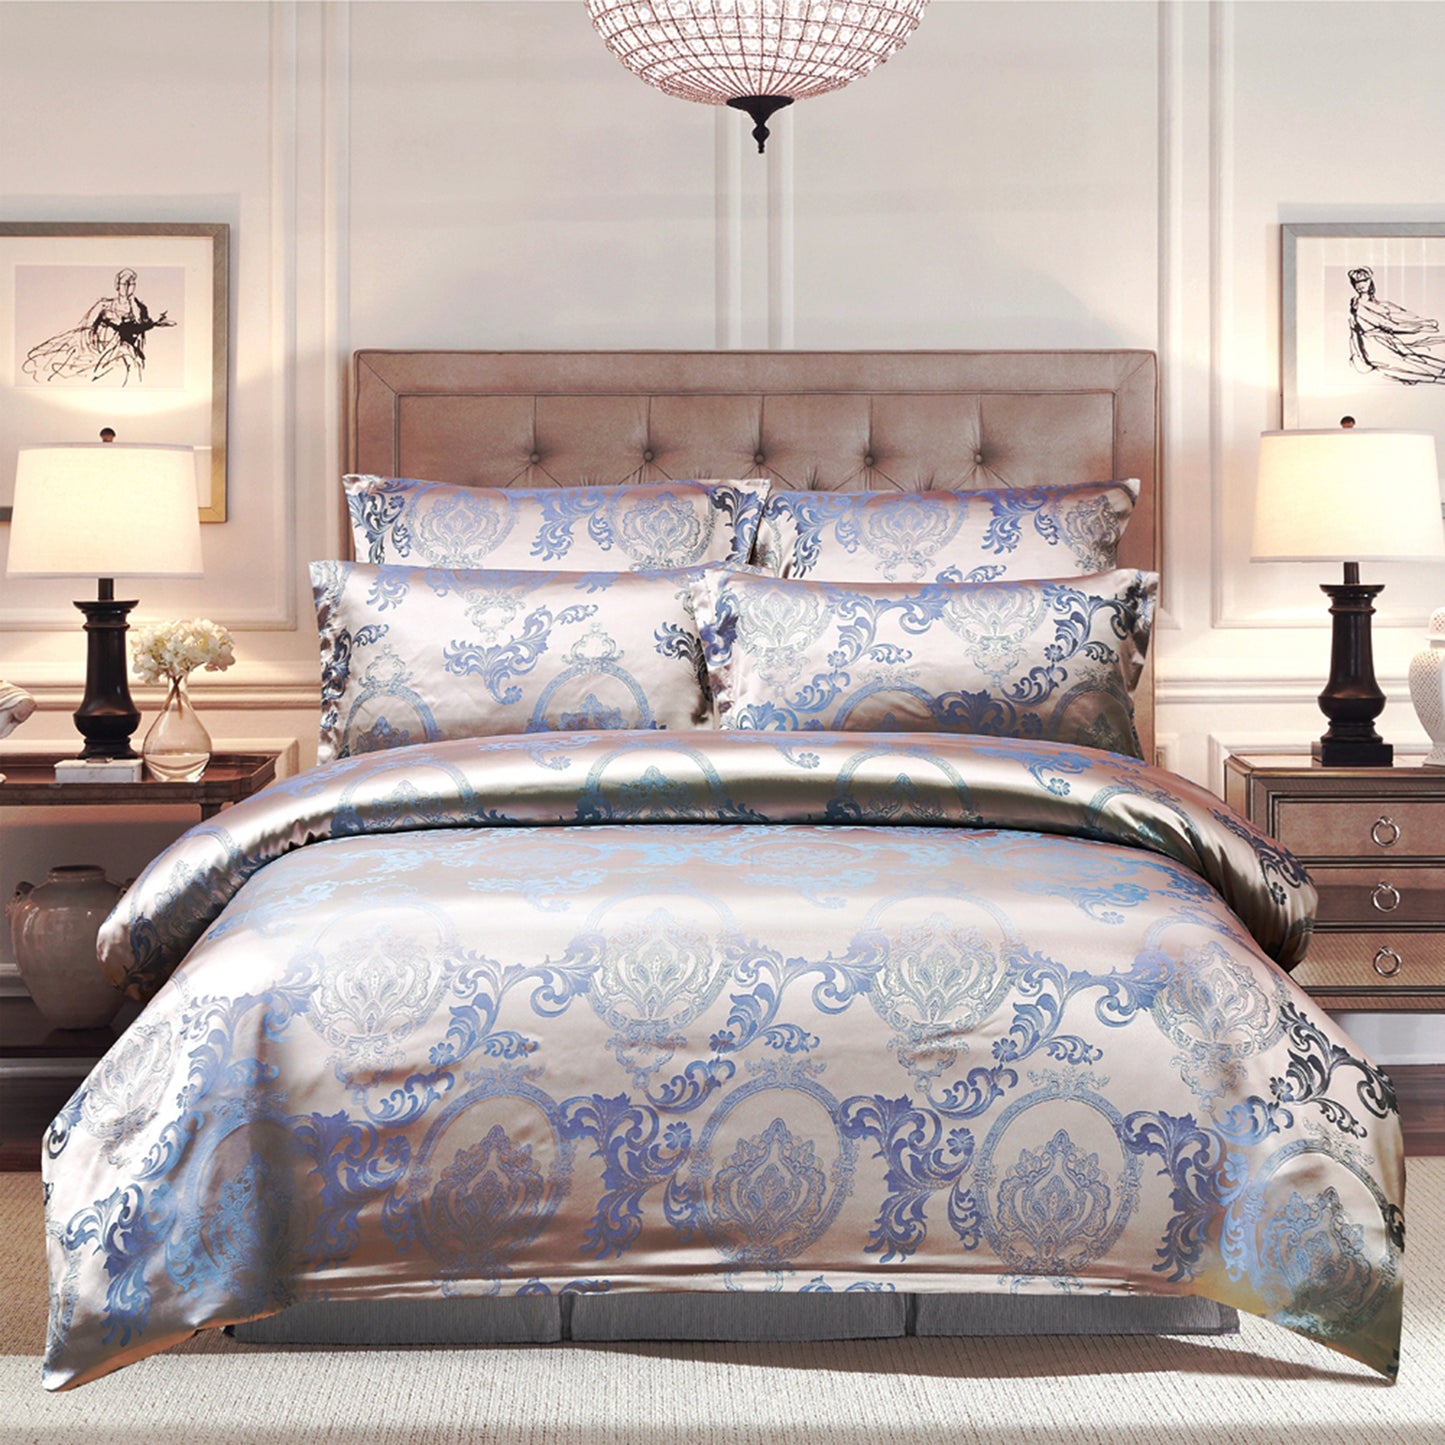 WONGS BEDDING Blue-Brown Embroidery Satin Craft Duvet Cover Set With 2 Pillow Case